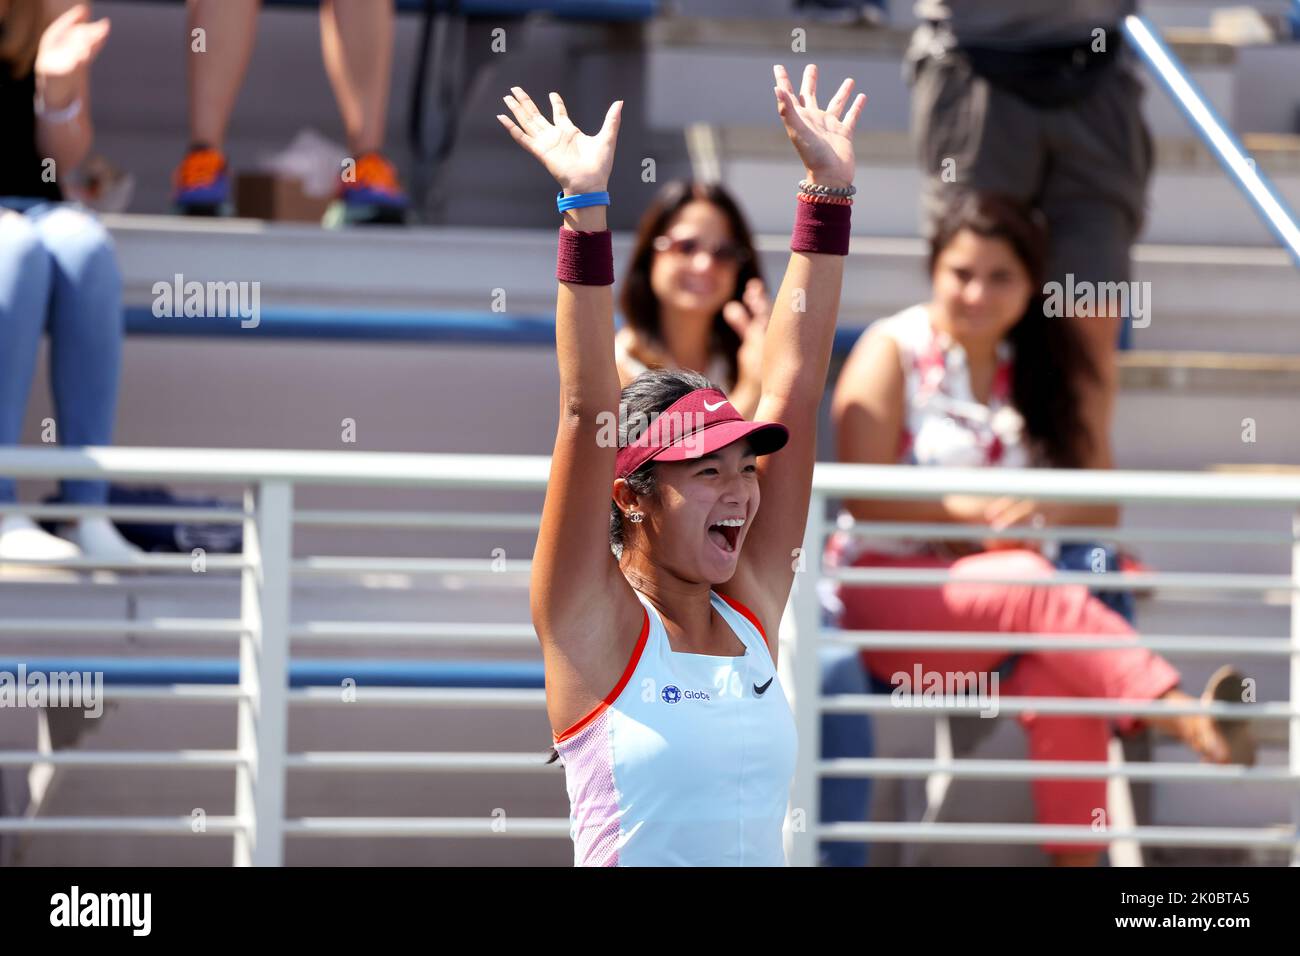 New York, USA. 10th Sep, 2022. Alexandra Eala of the Philippines, reacts after winning the US Open Girls Singles final against Lucie Havlickova of the Czech Republic. Eala won the match in straight sets to claim the Girls Juniors title. Credit: Adam Stoltman/Alamy Live News Credit: Adam Stoltman/Alamy Live News Stock Photo